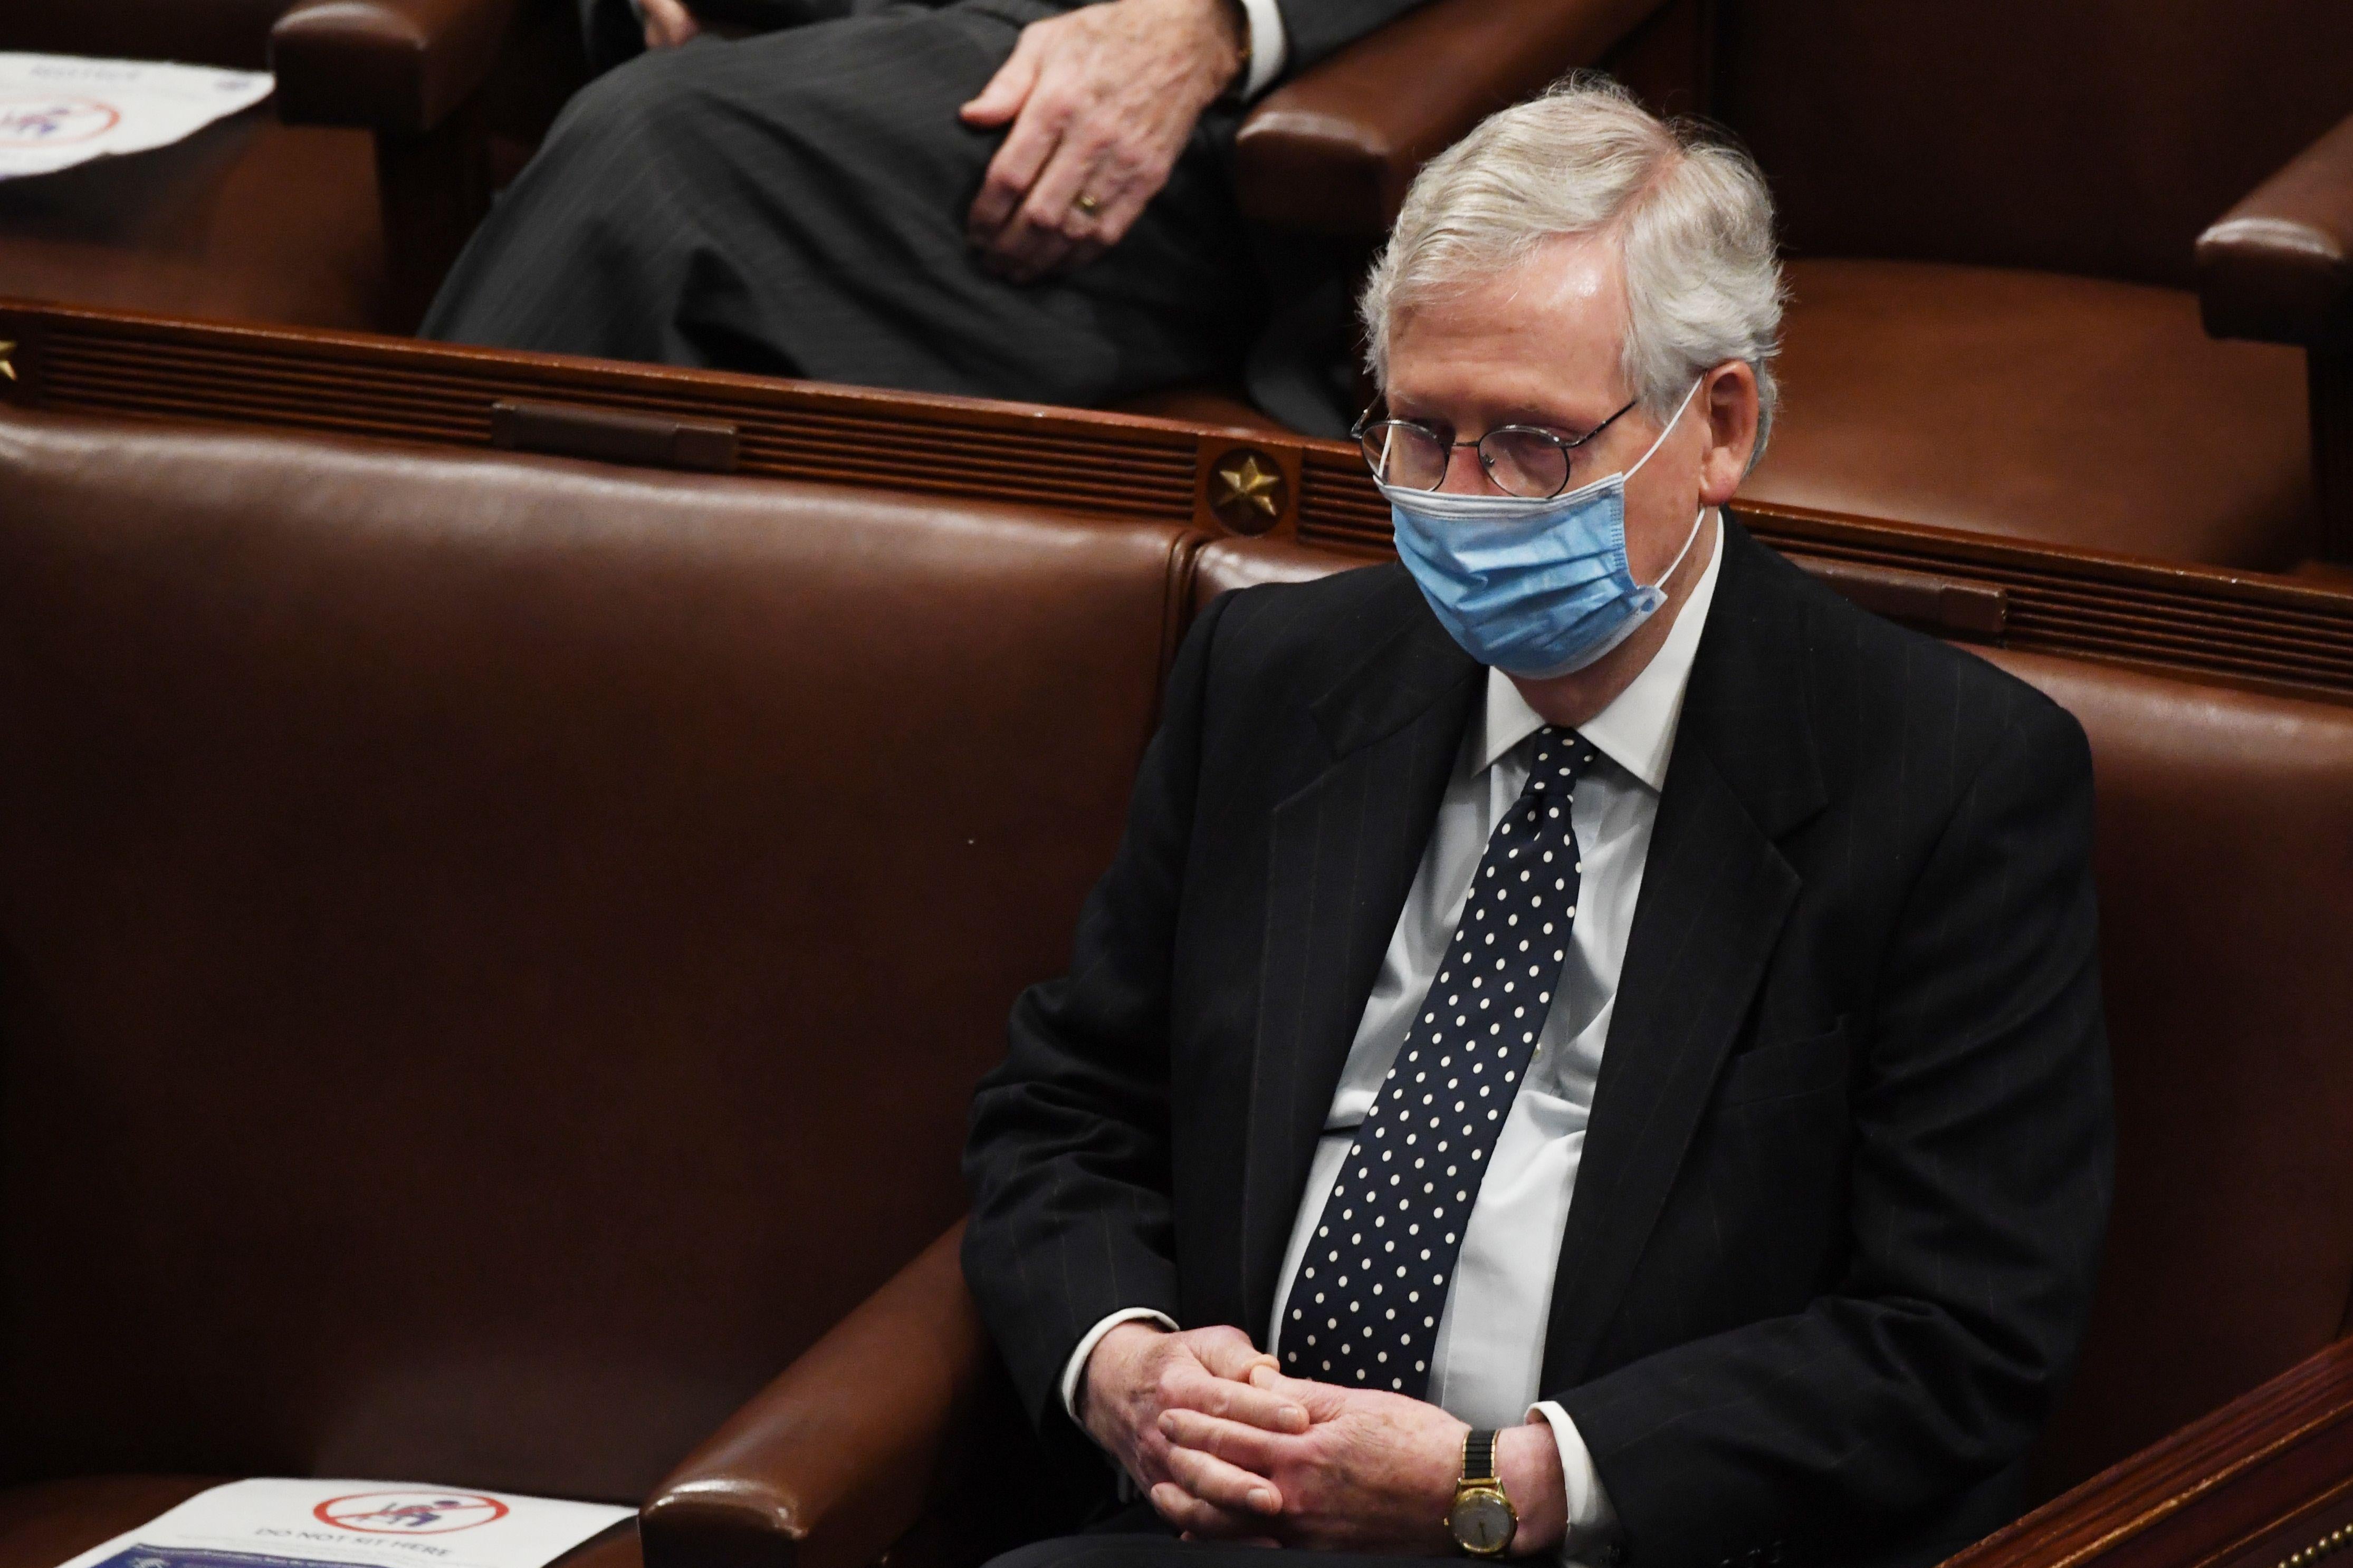 Mitch McConnell, wearing a mask, sits with his hands folded in his lap